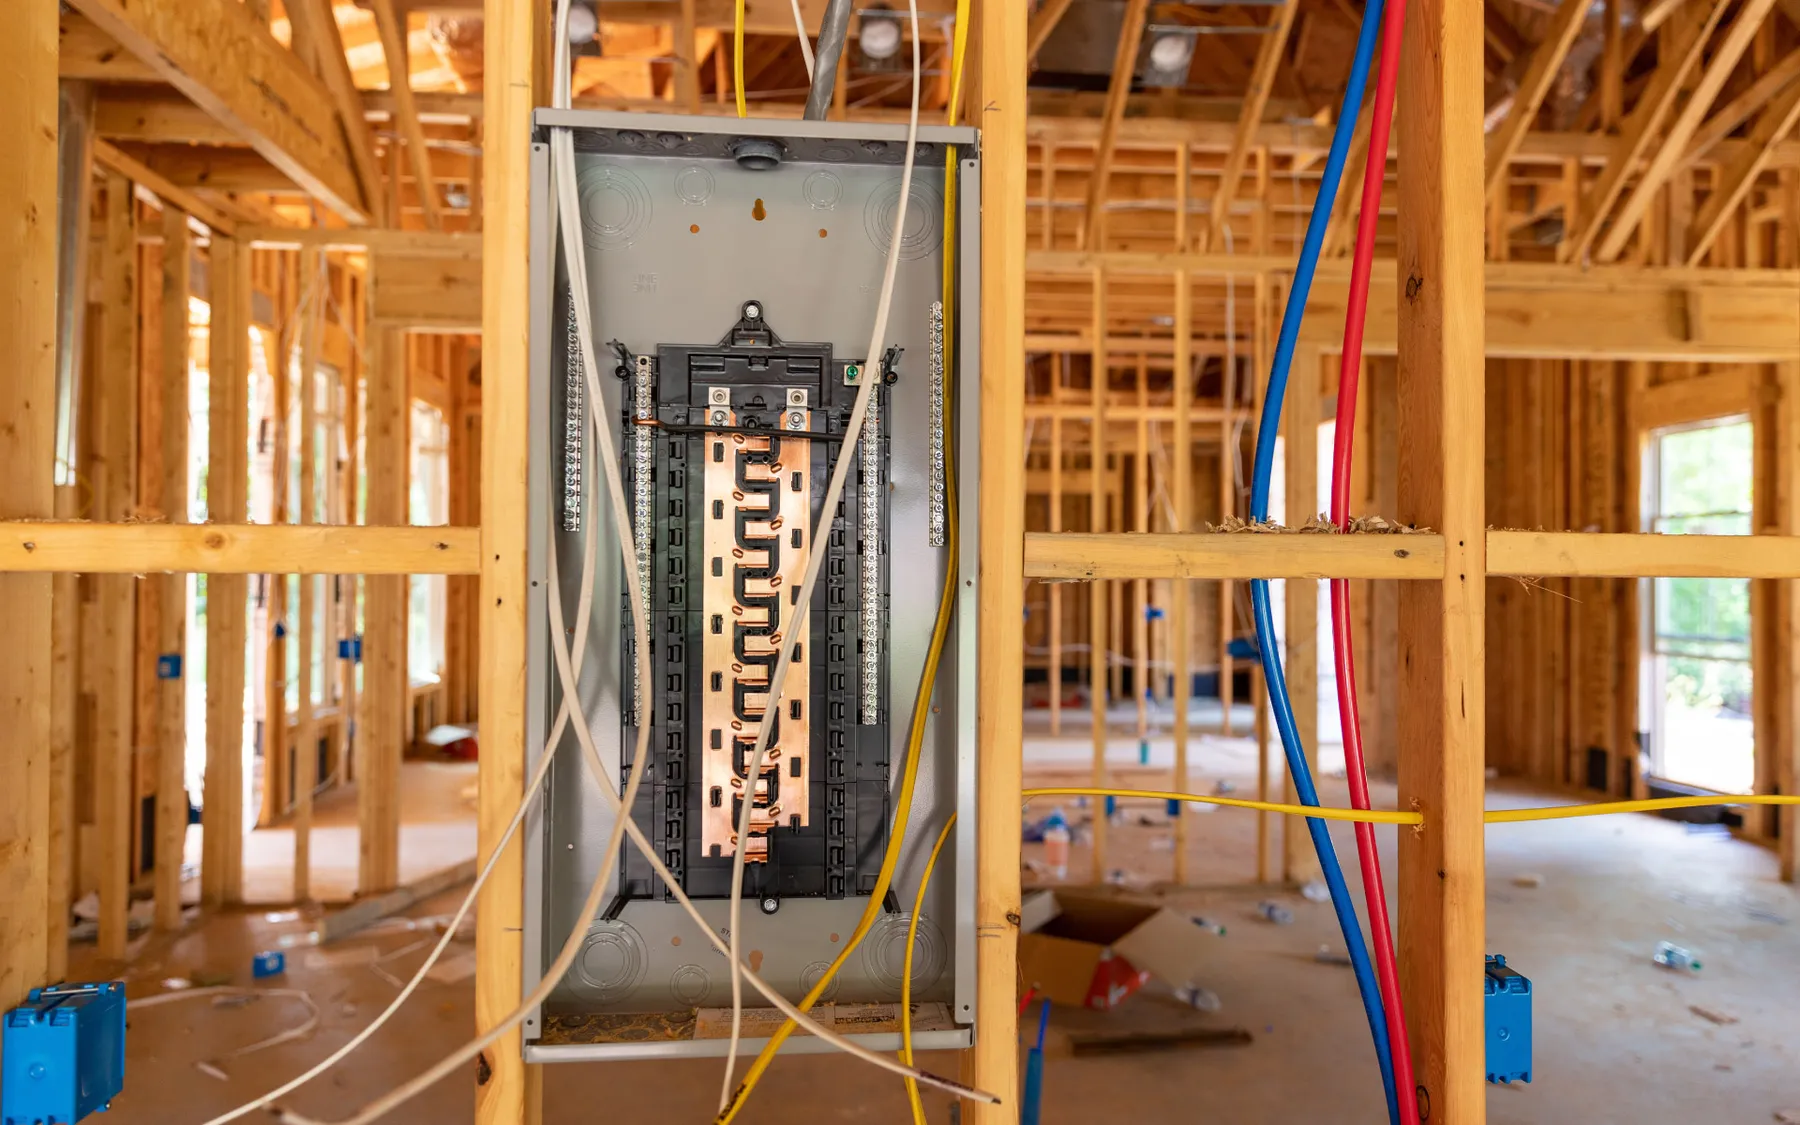 An electrical service panel in a home that is being built